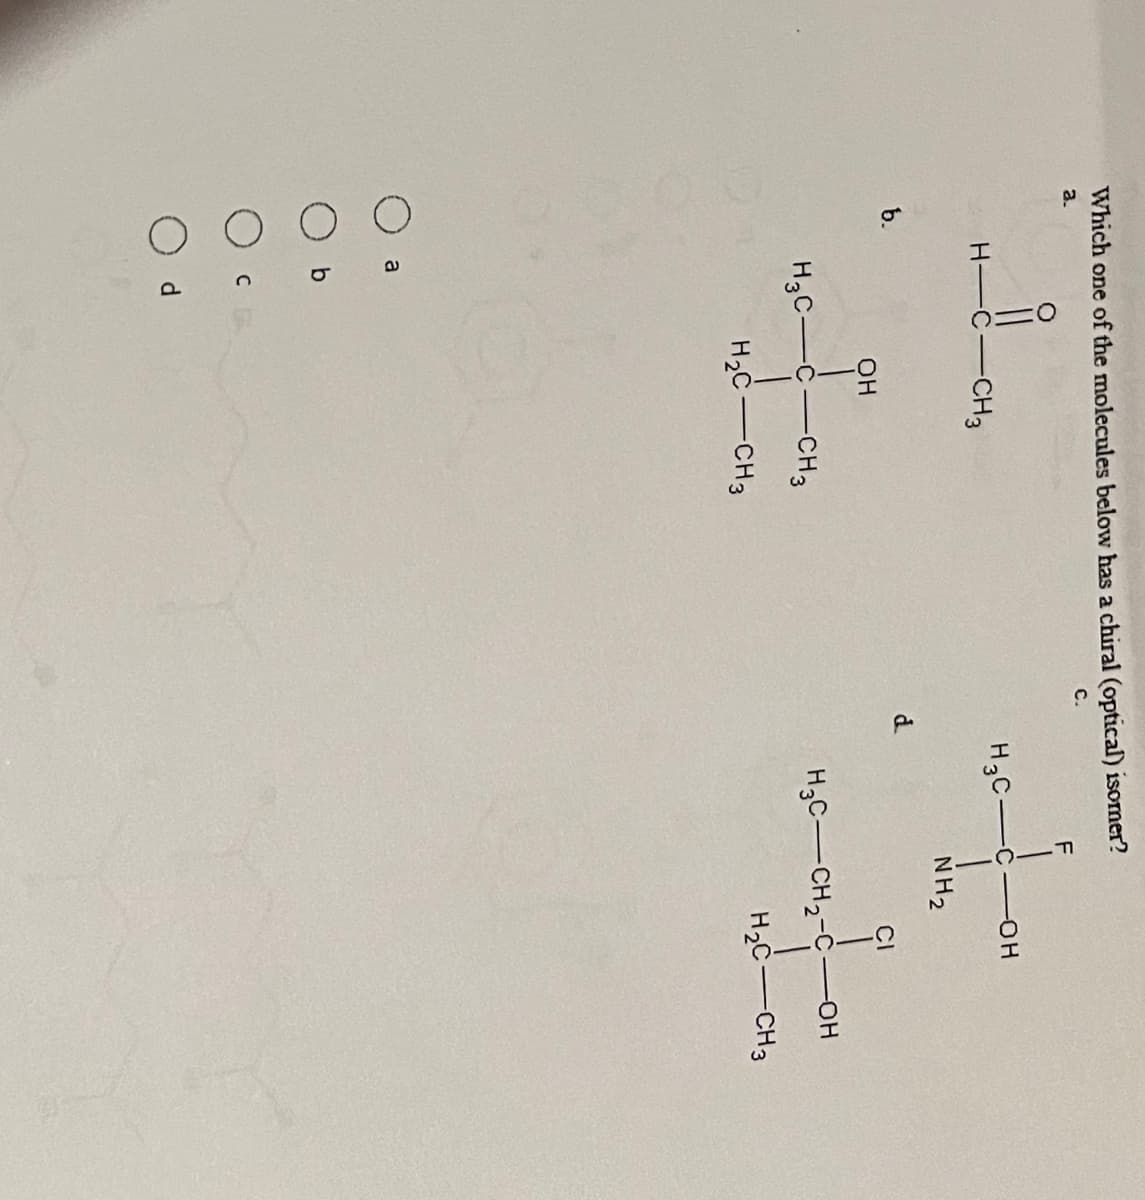 Which one of the molecules below has a chiral (optical) isomer?
a.
C.
b.
H-C
a
H3C-C-CH3
H₂C-CH3
с
-CH3
d
OH
d..
H3C-
F
NH₂
-OH
CI
H3C-CH₂-COH
H₂C-CH3